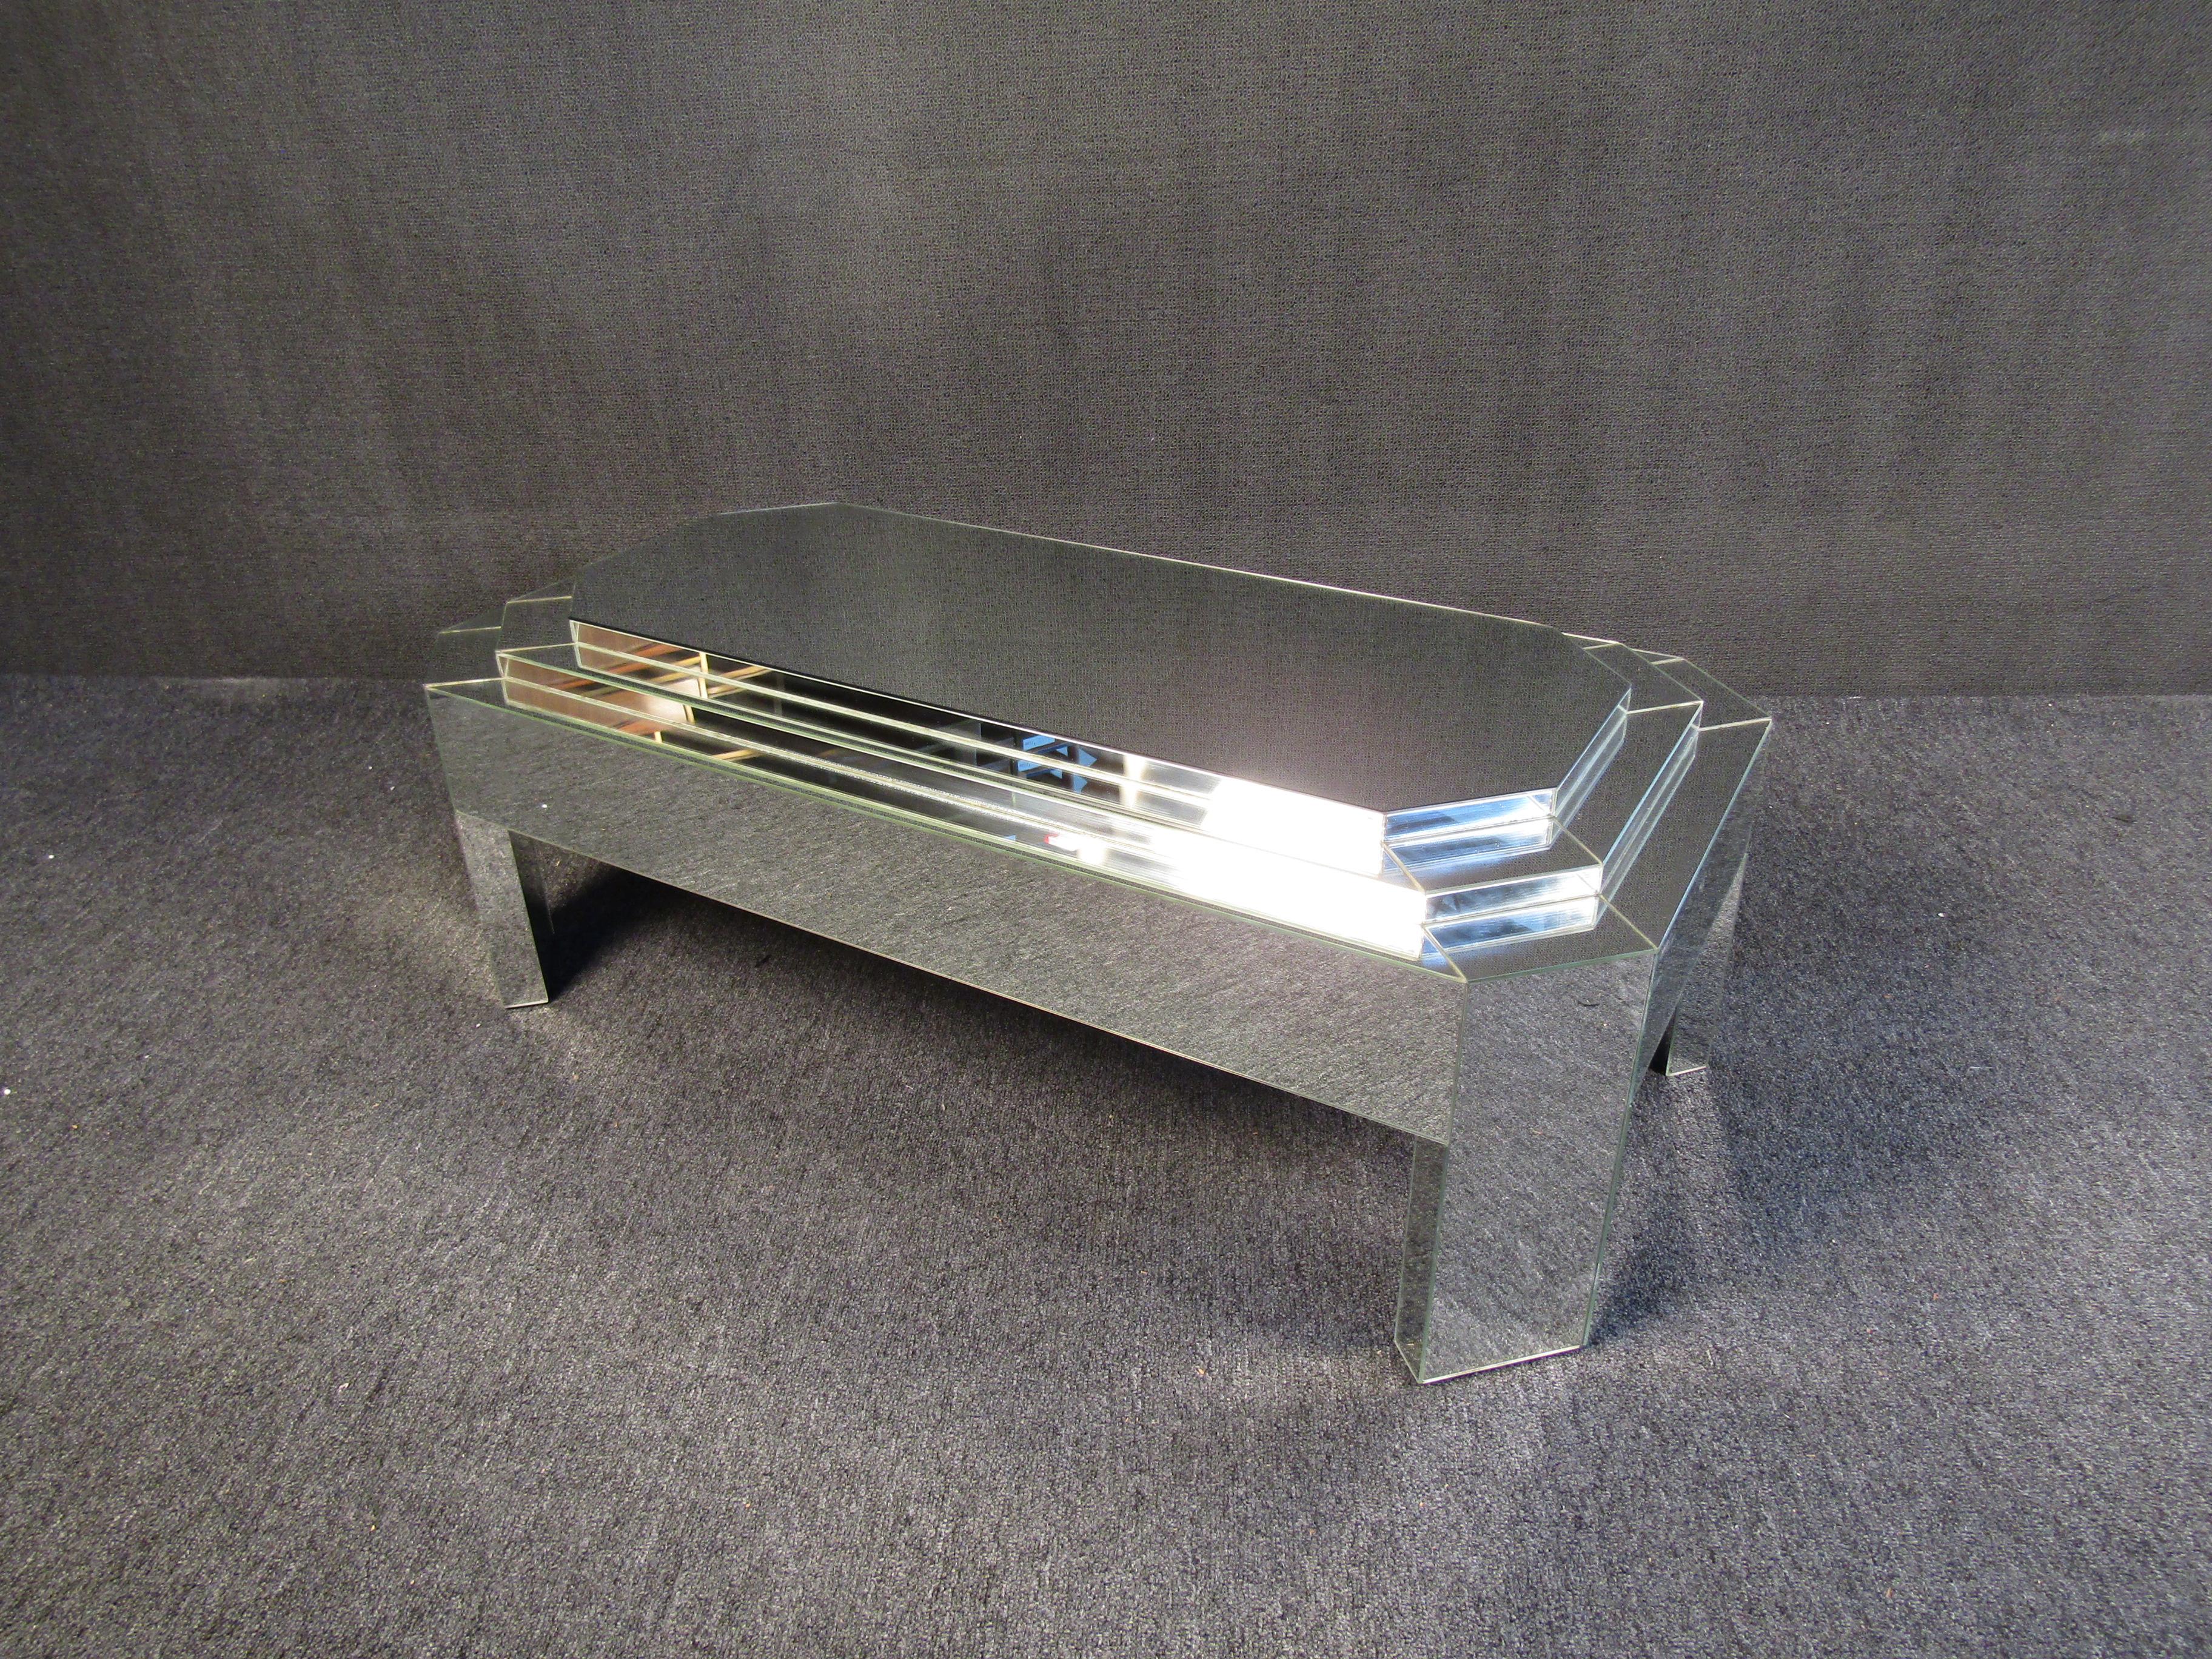 An incredible mirrored coffee table that can add bold Mid-Century Modern flair to any room. A reflective mirrored surface and geometric design offers a unique look. Please confirm item location with seller (NY/NJ).